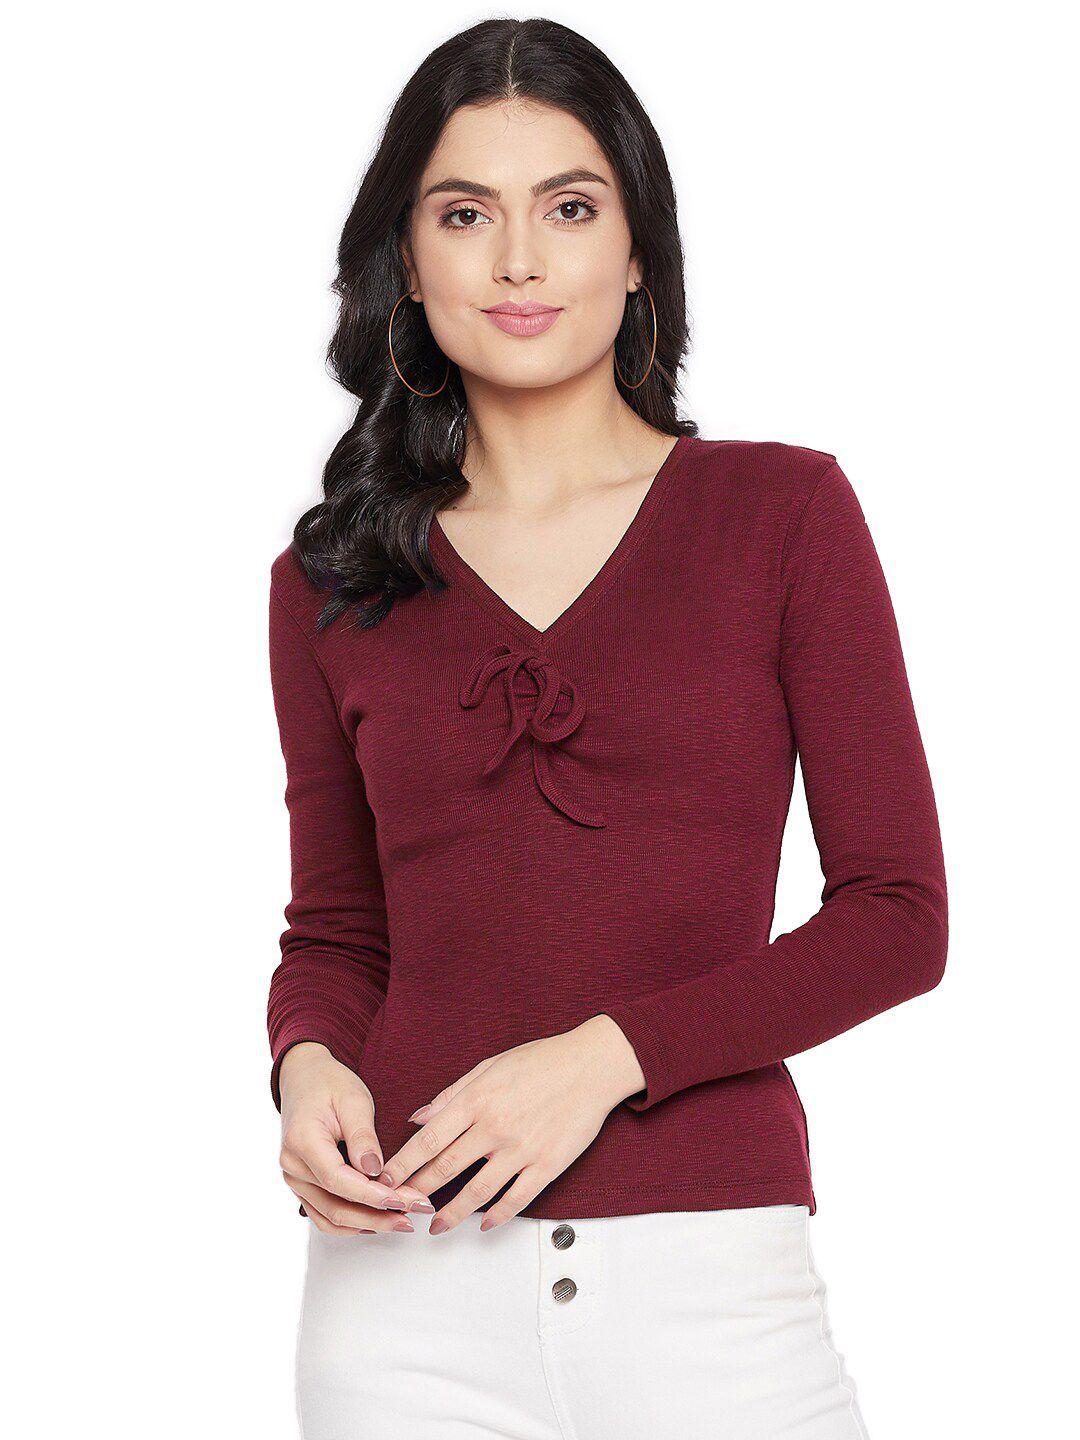 harbor n bay v-neck long sleeves fitted top